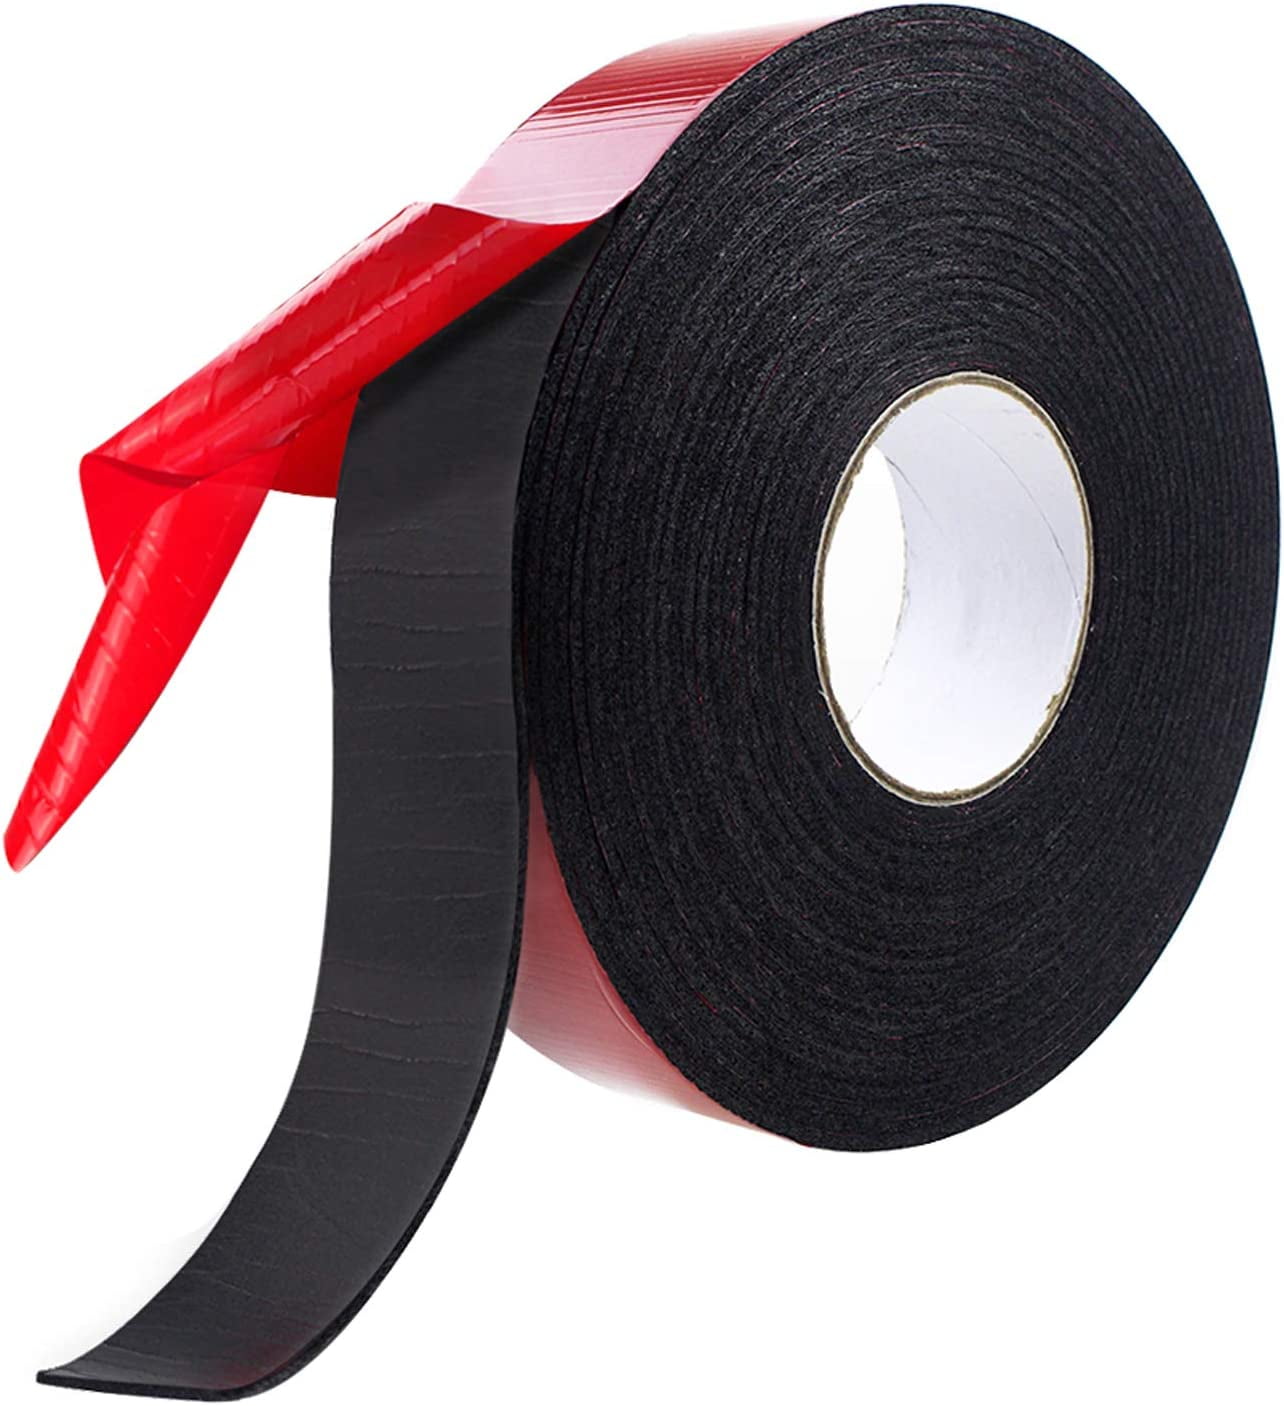 Magnetic Tape - Extra Magnetic Pull Strong 3M VHB Adhesive - Heavy Duty Thicker Magnet Strips - Flexible Flat Kitchen Magnets Sticky Wall Holder